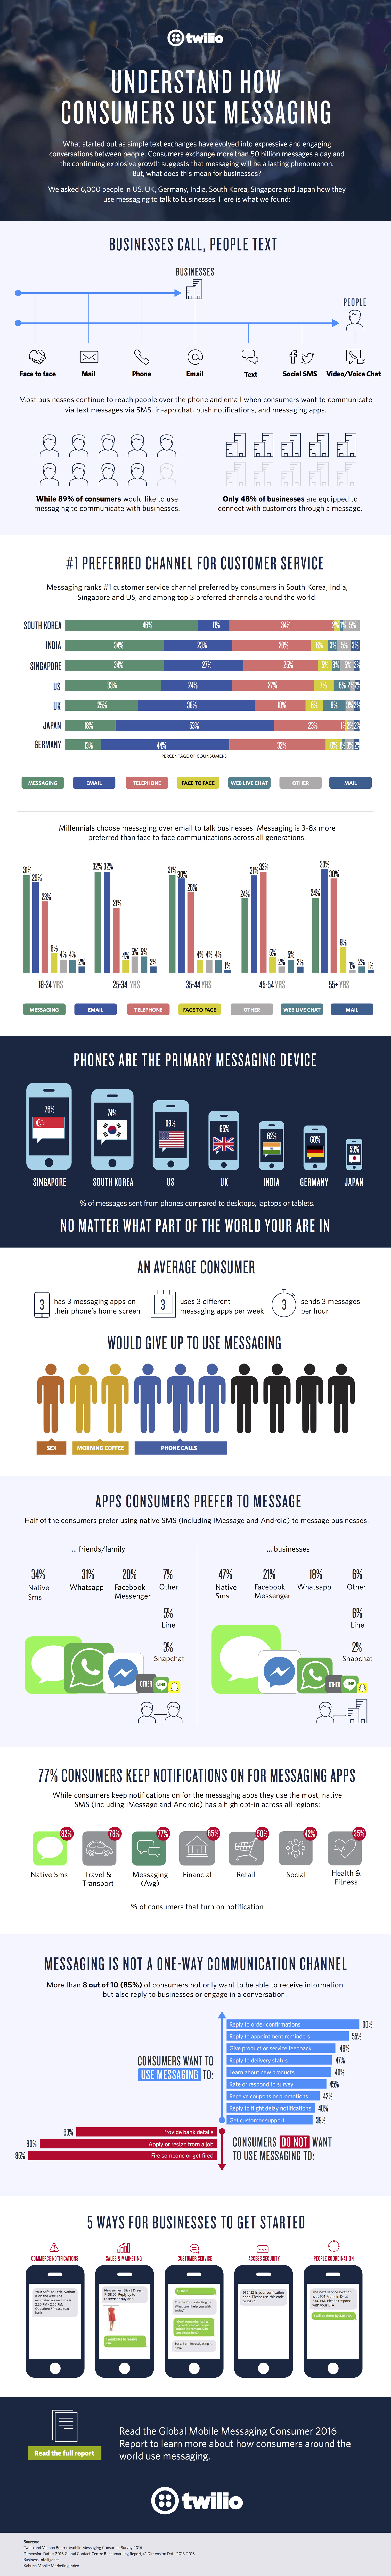 twilio_global_consumer_mobile_messaging_trends_infographic